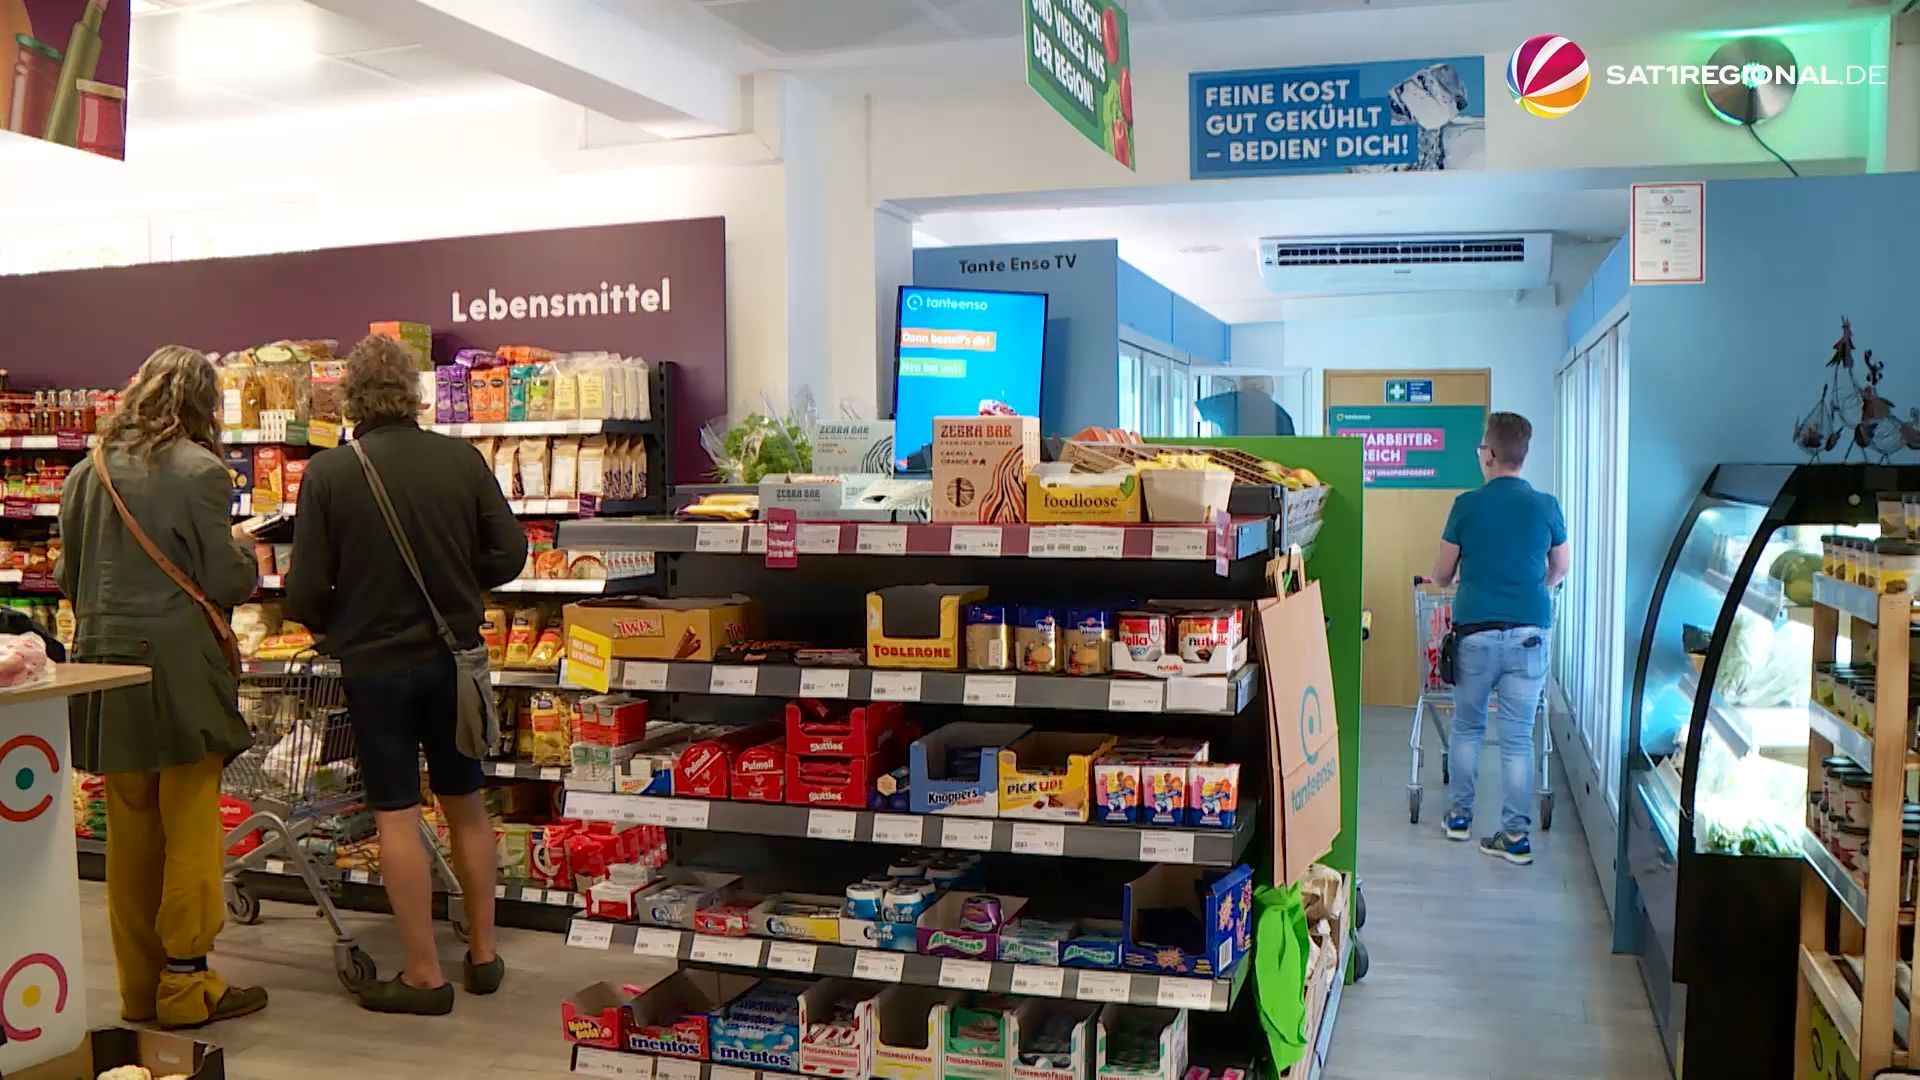 24-hour supermarket - with self-service checkout and partly without staff